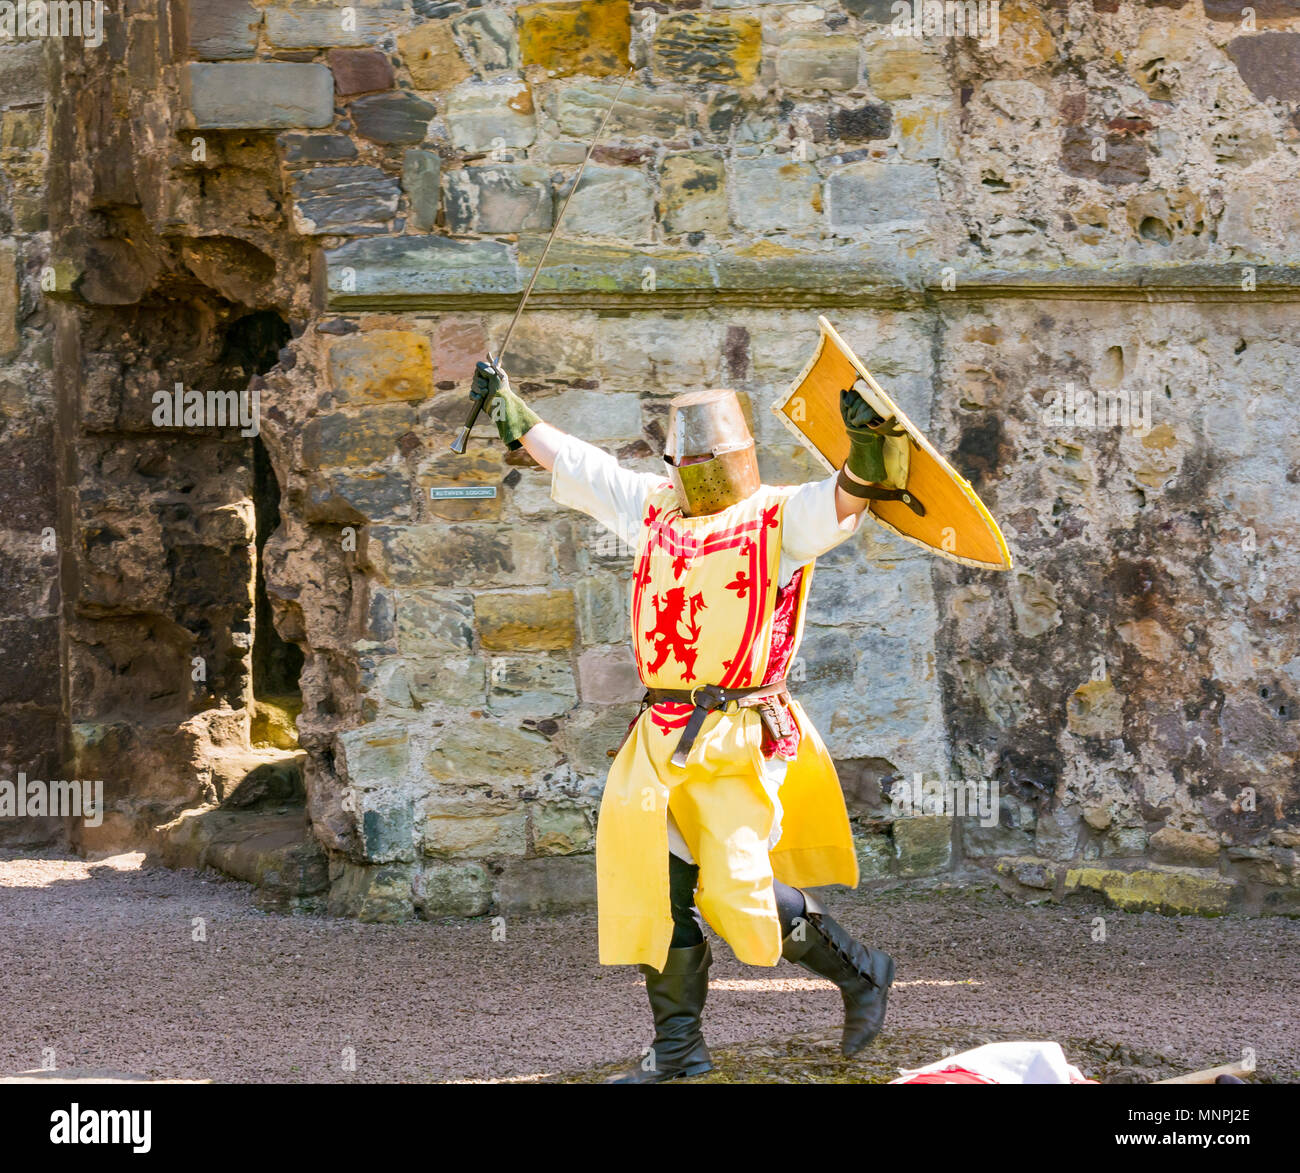 Dirleton, East Lothian, Scotland, UK, 19th May 2018.  Dirleton, East Lothian, Scotland, UK, 19th May 2018.  Dirleton Castle attack re-enactment. The Historic Saltire Society staging a tongue-in-cheek re-enactment of an attack by Robert the Bruce, King of Scotland, around 1311, to take the castle from the English, dressed in authentic clothes and armour and wielding replica weapons in Historic Environment Scotland's Dirleton Castle. A man playing Robert the Bruce dressed in costume with a lion rampant, great helm and sword Stock Photo